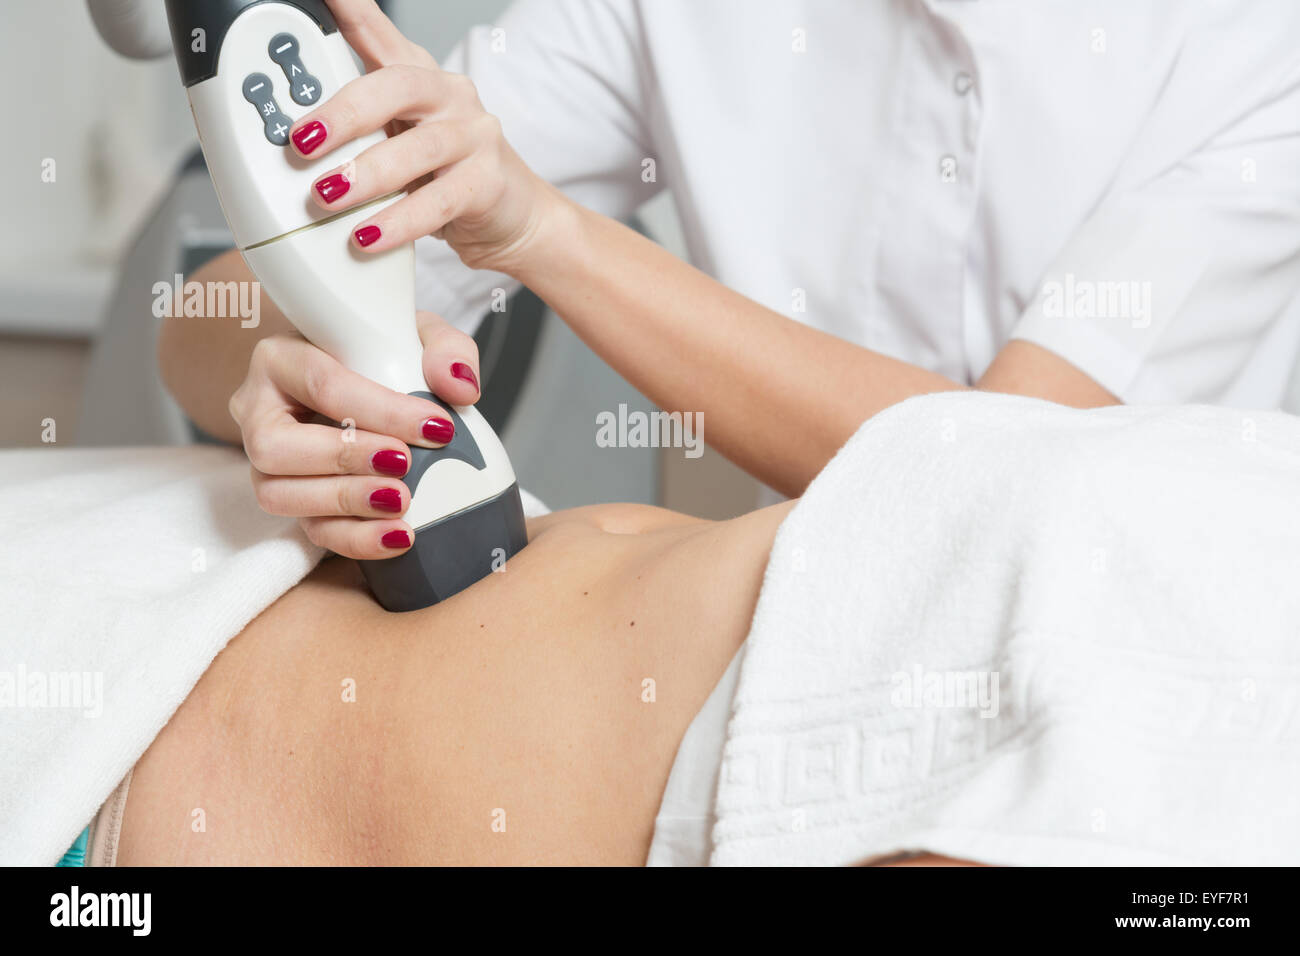 Cosmetician  making procedure of lymphatic drainage with a professional equipment Stock Photo